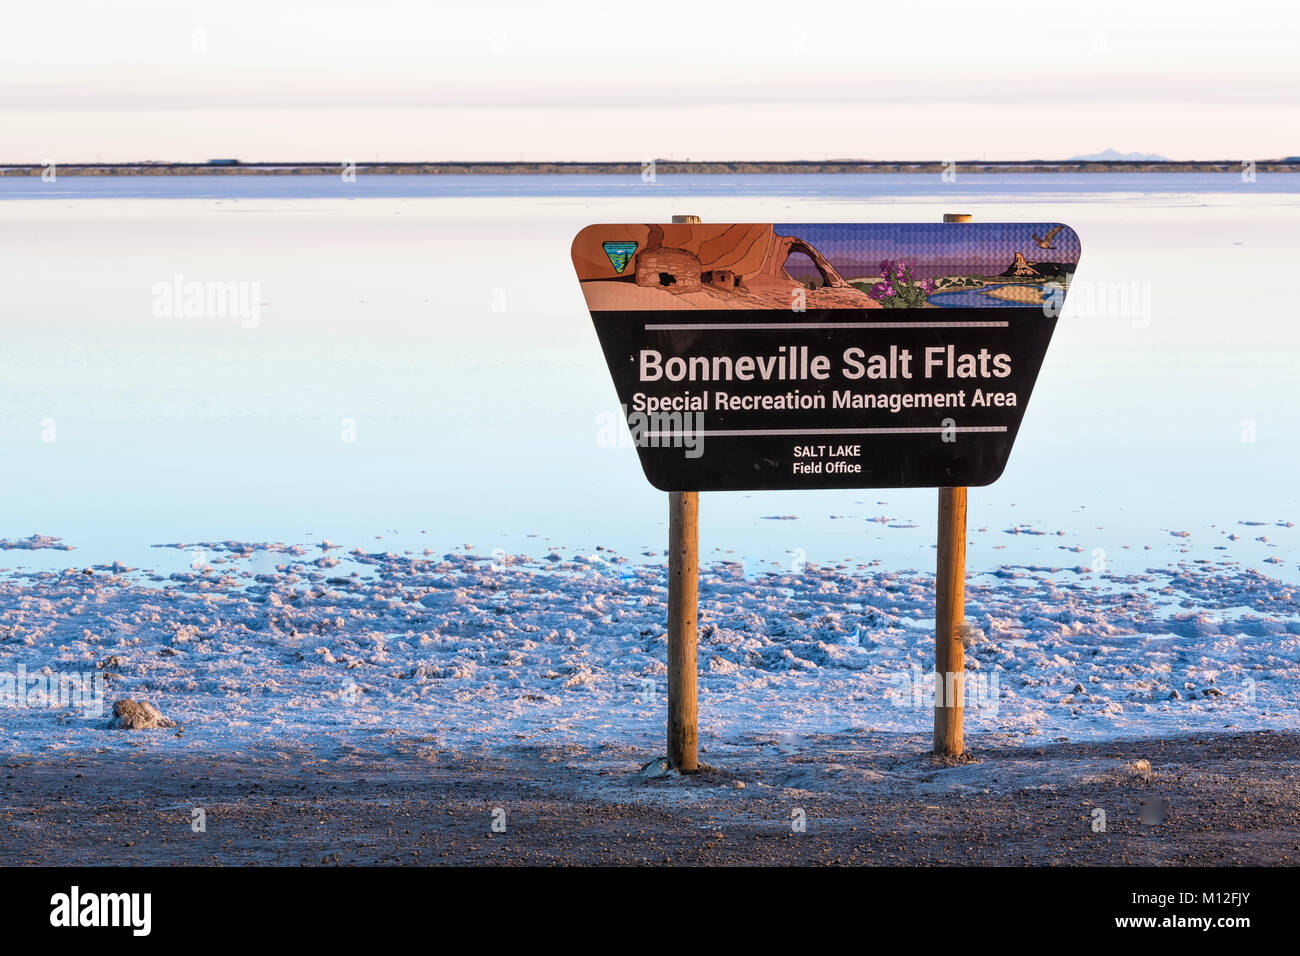 Sign for the Bonneville Salt Flats Special Recreation Management Area, which is BLM land where quests for land speed records take place, located west  Stock Photo